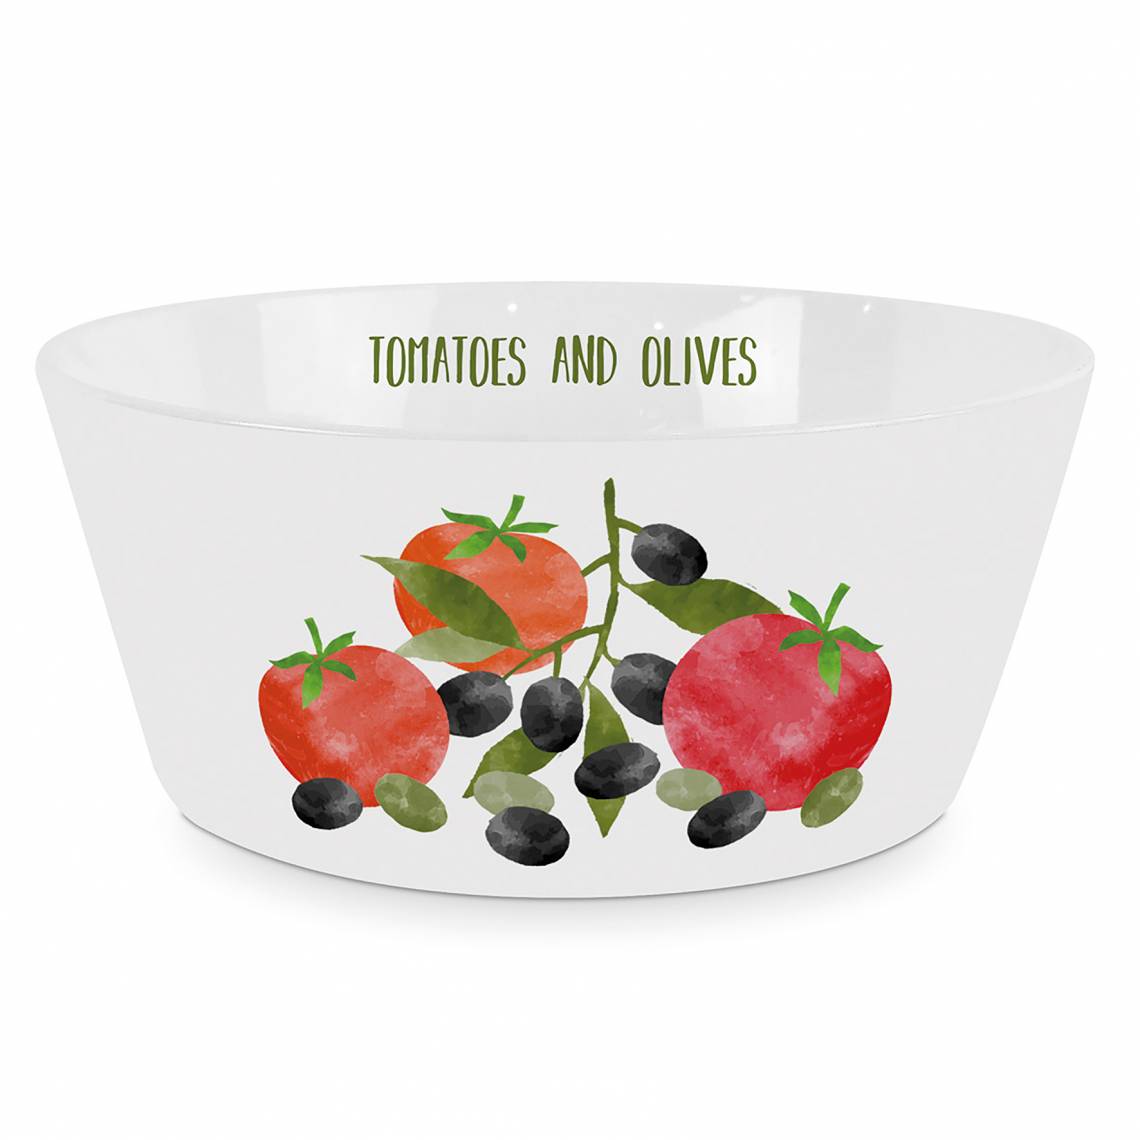 PPD 604345 Tomatoes & Olives Trend Bowl